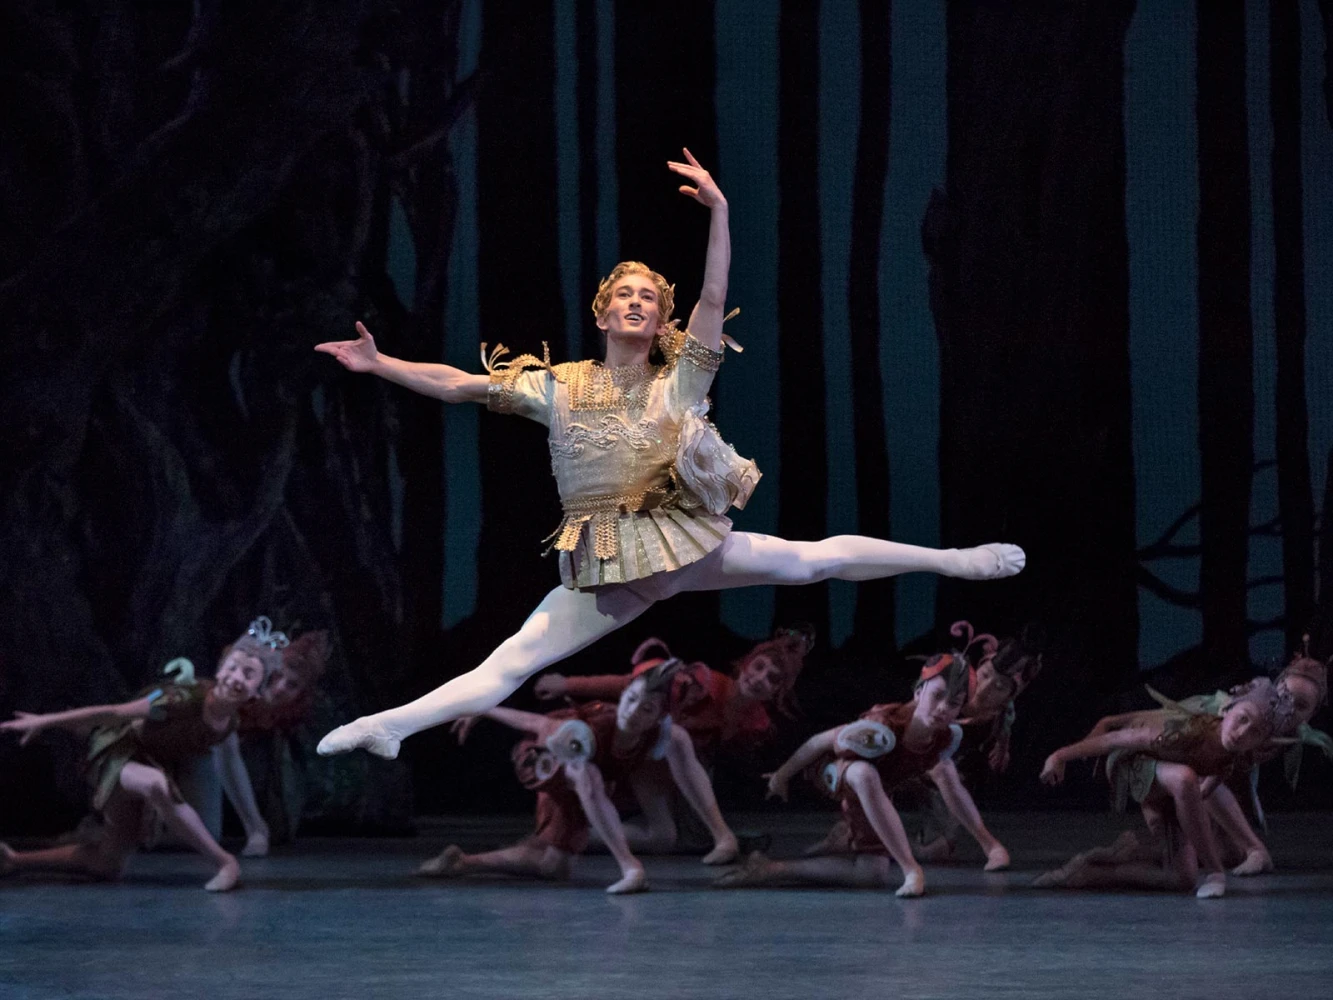 New York City Ballet: What to expect - 3